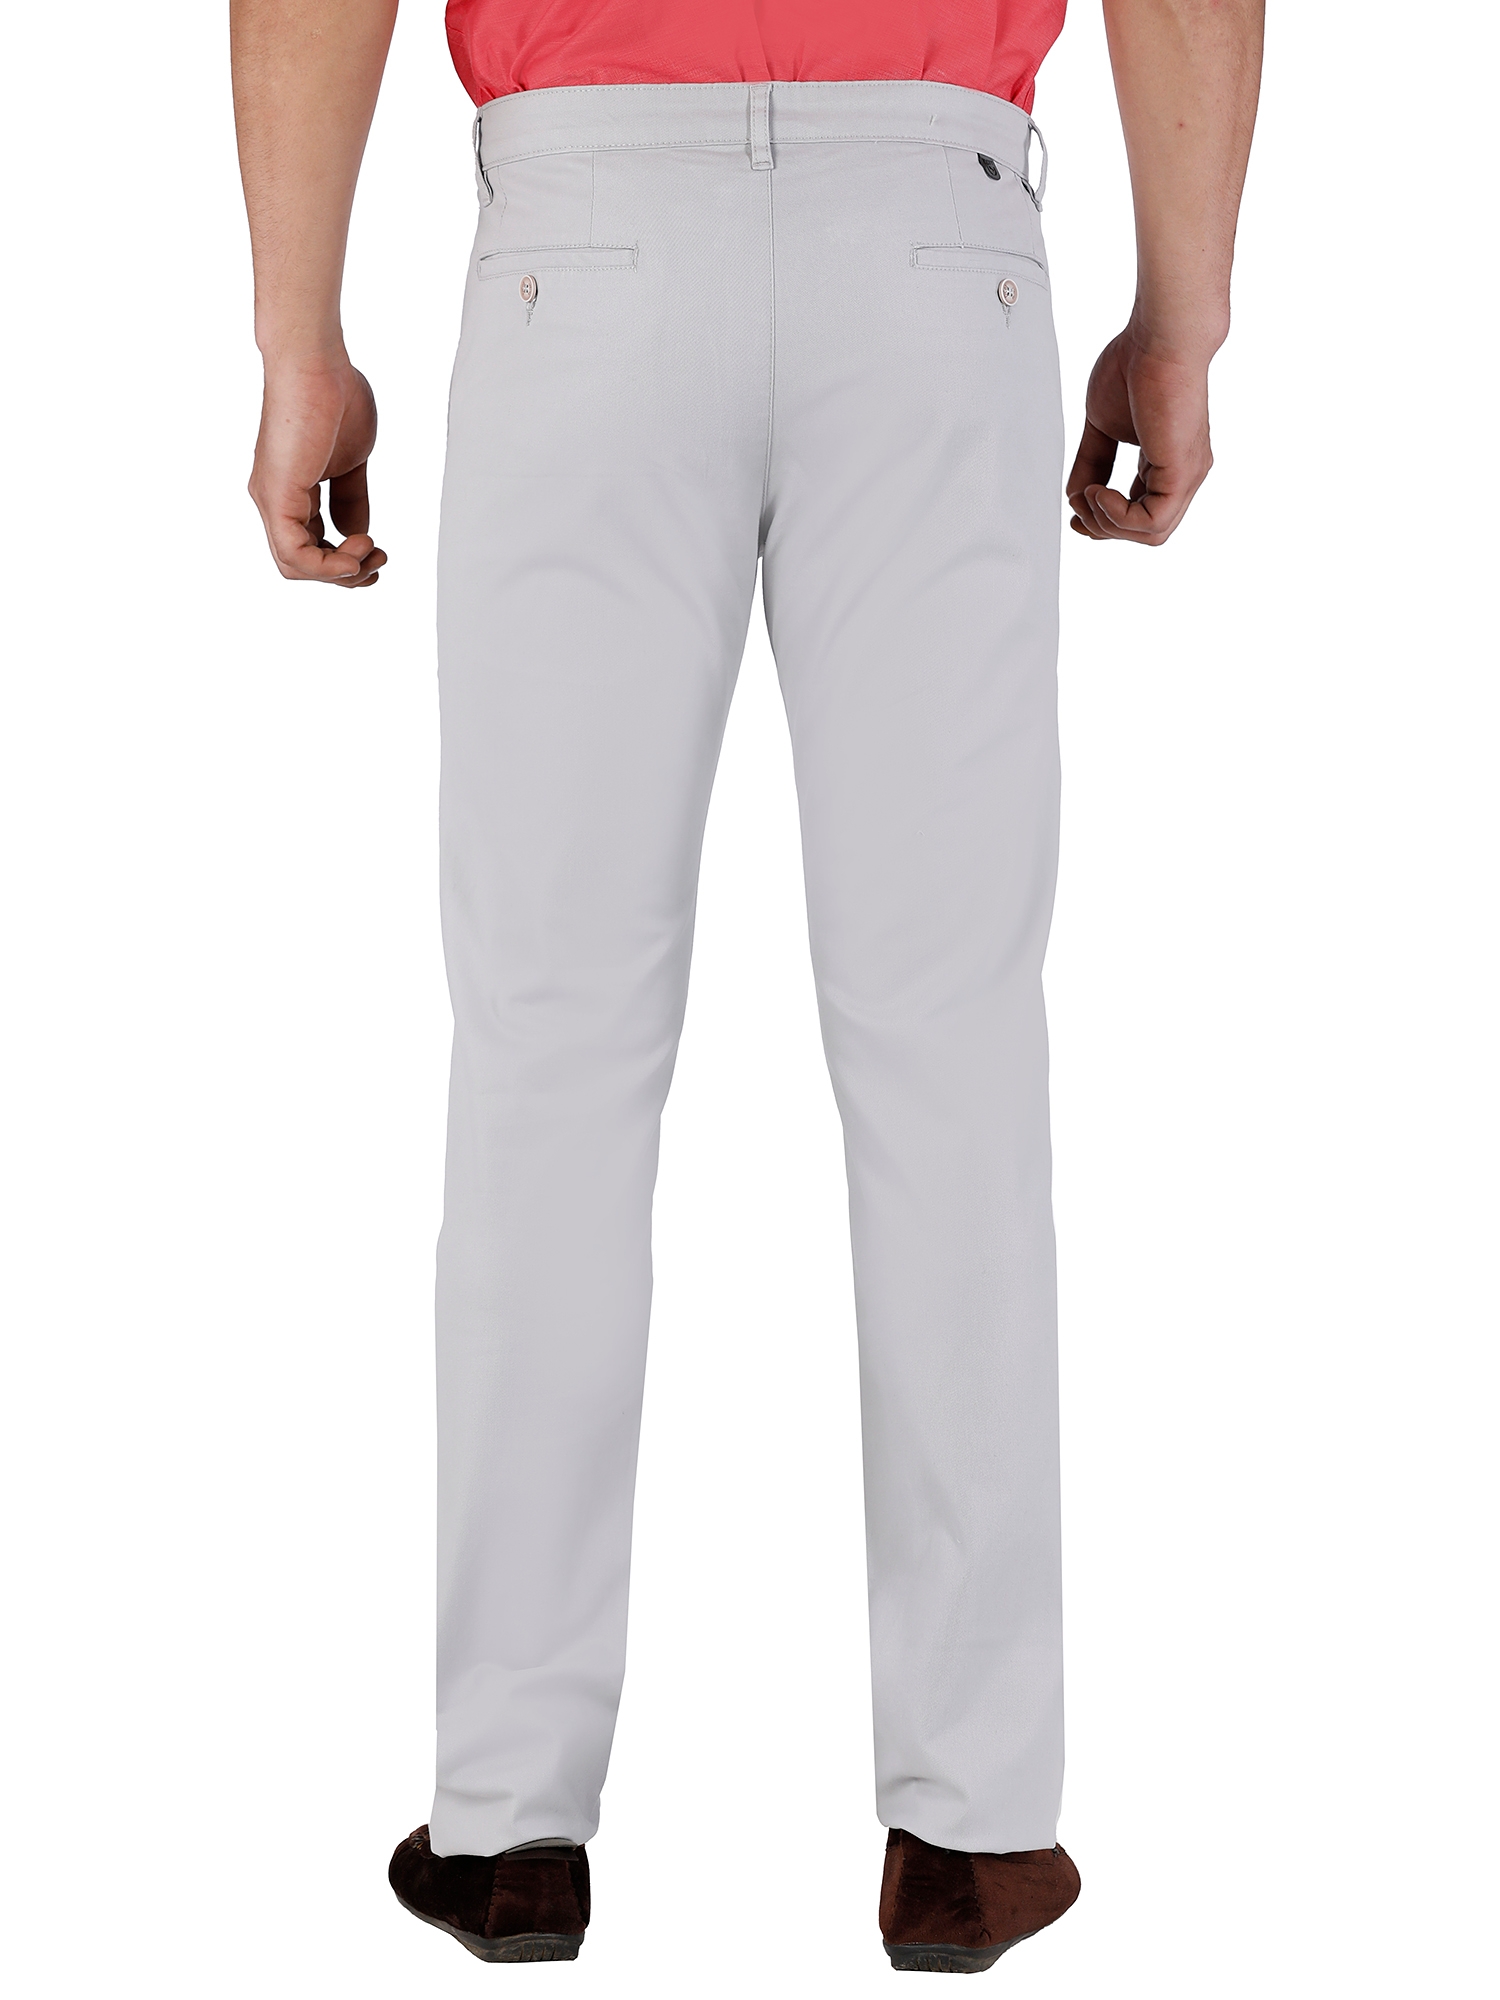 D'cot by Donear | D'cot by Donear Men Grey Cotton Relaxed Solid Casual Trouser